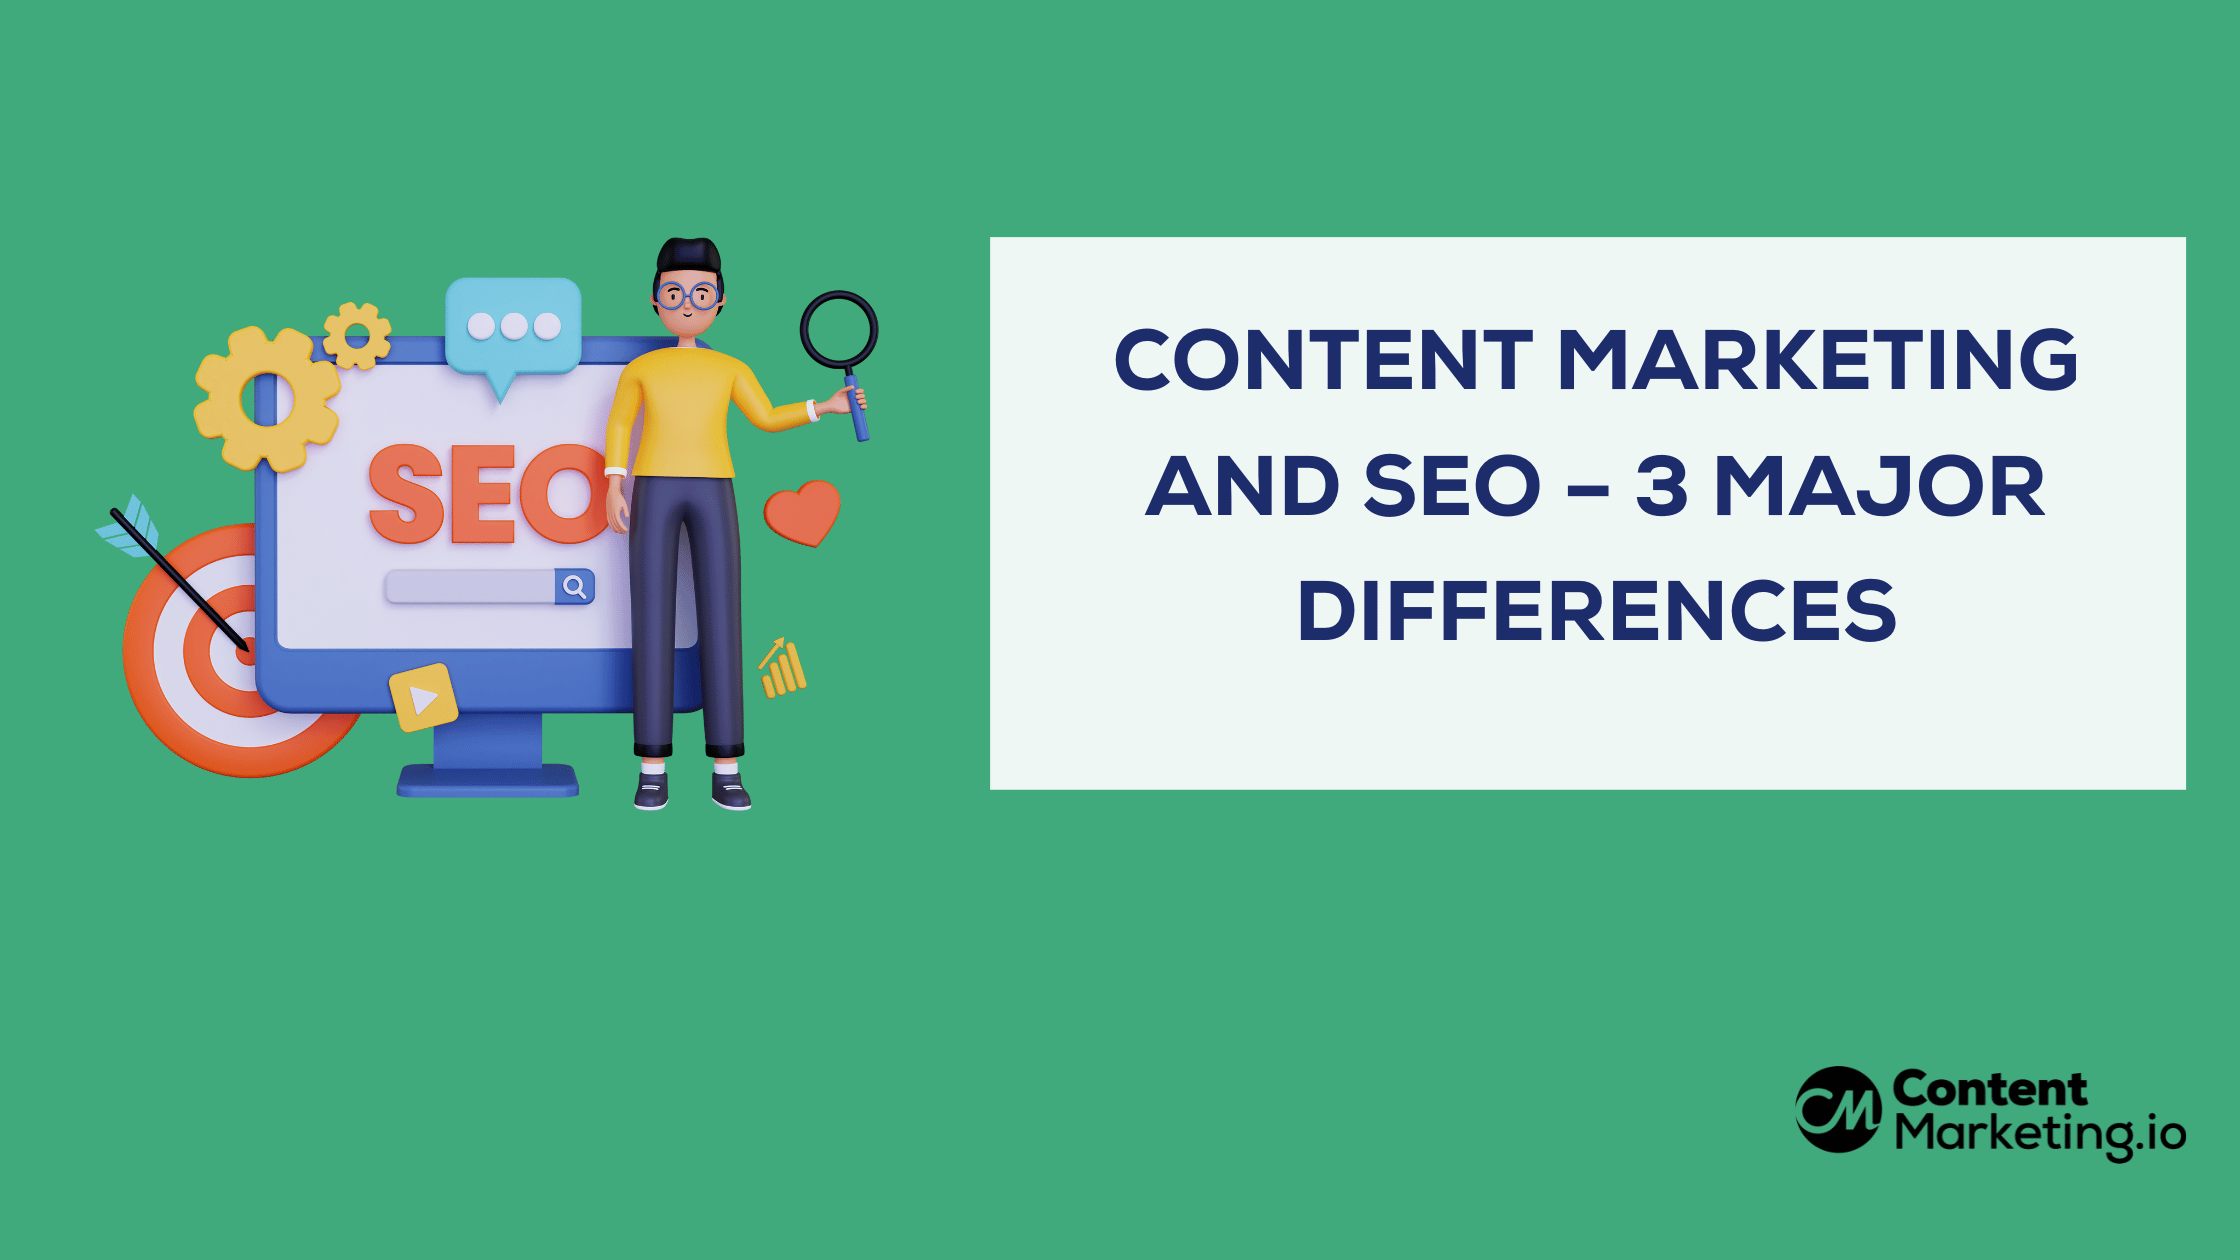 Content Marketing and SEO – 3 Major Differences